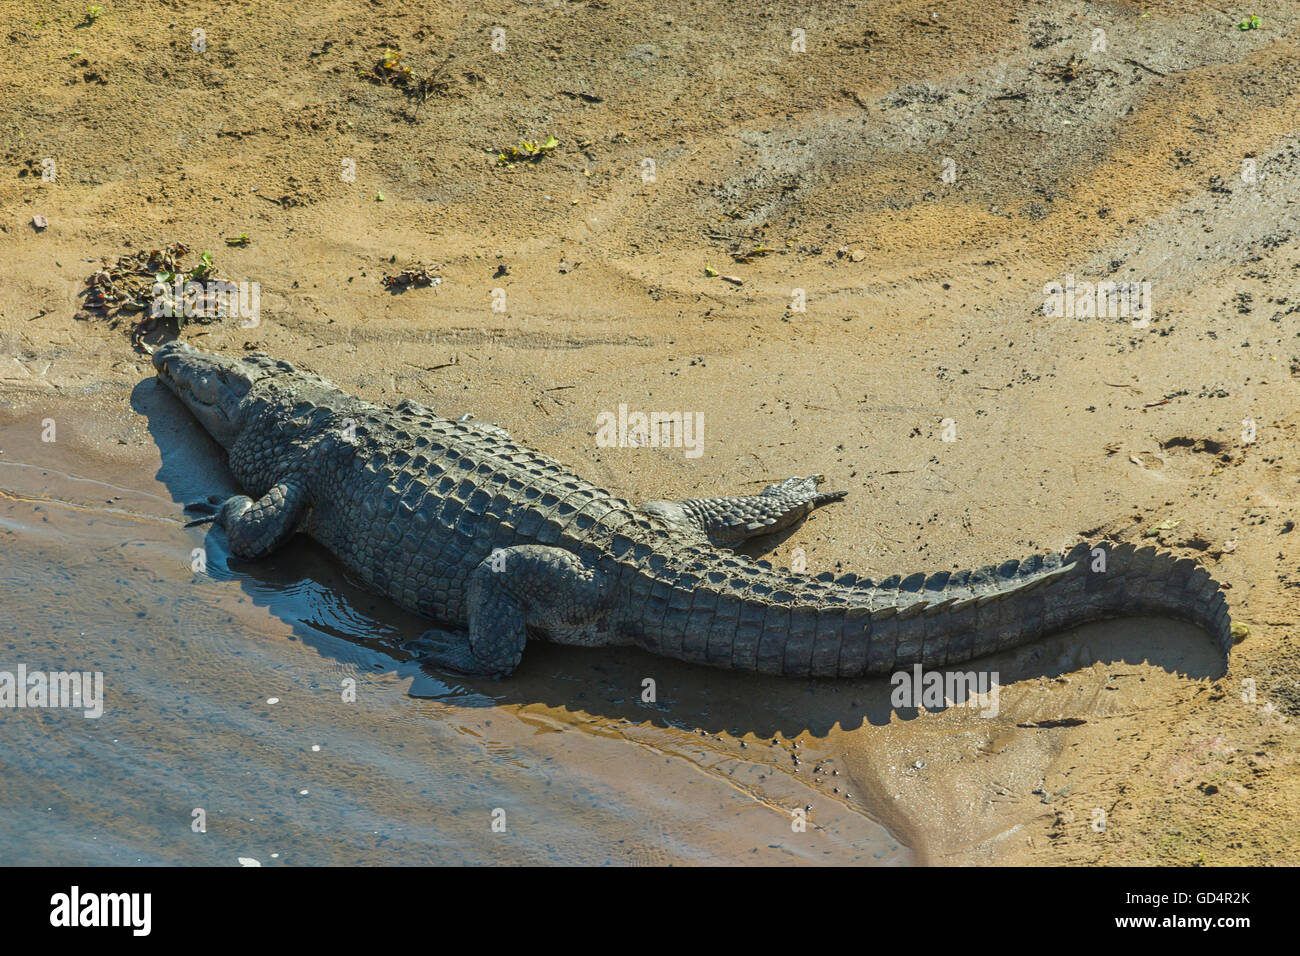 Large crocodile lying on a sand bank in the middle of a river Stock Photo